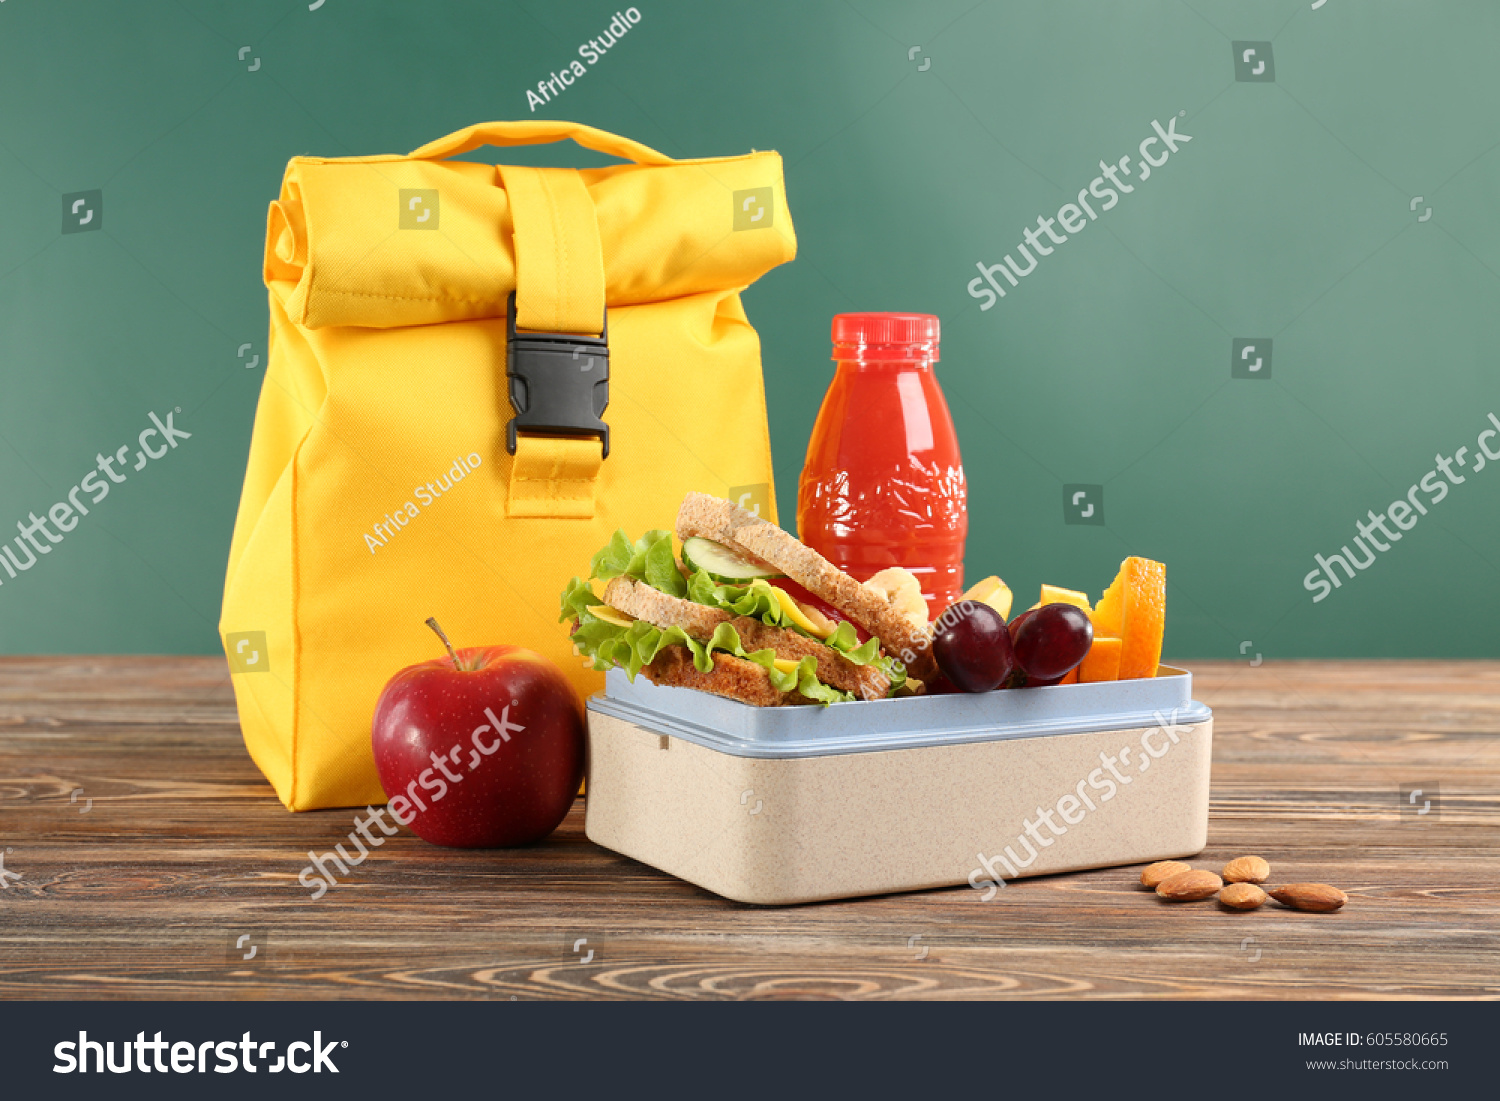 Lunch box with appetizing food and bag on wooden table against chalkboard background #605580665